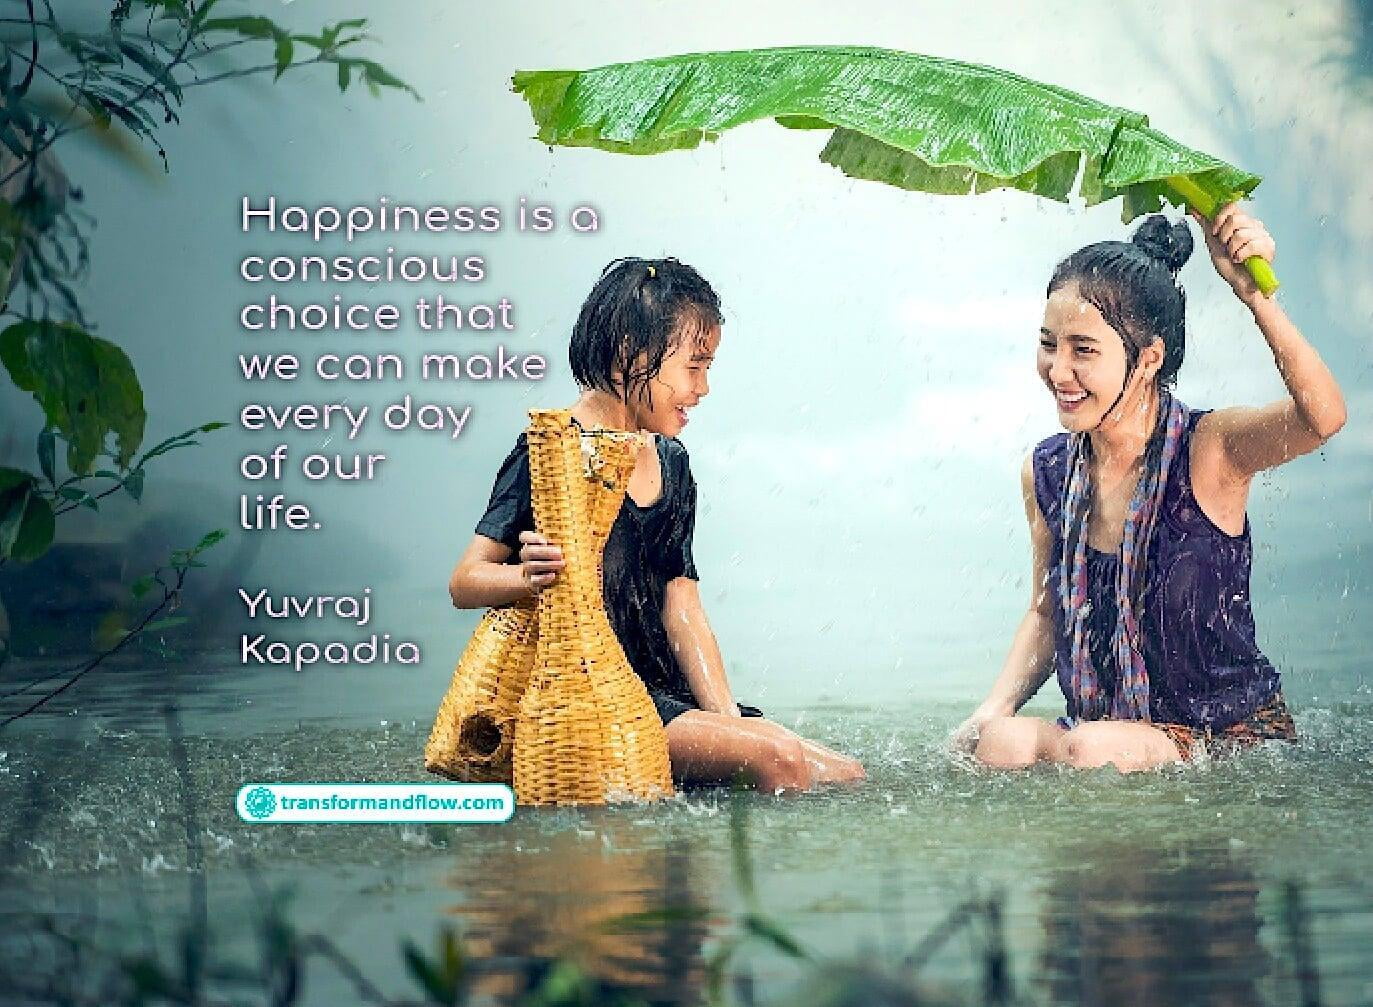 Happiness is a conscious choice that we can make every day of our life. Yuvrai Kapadia